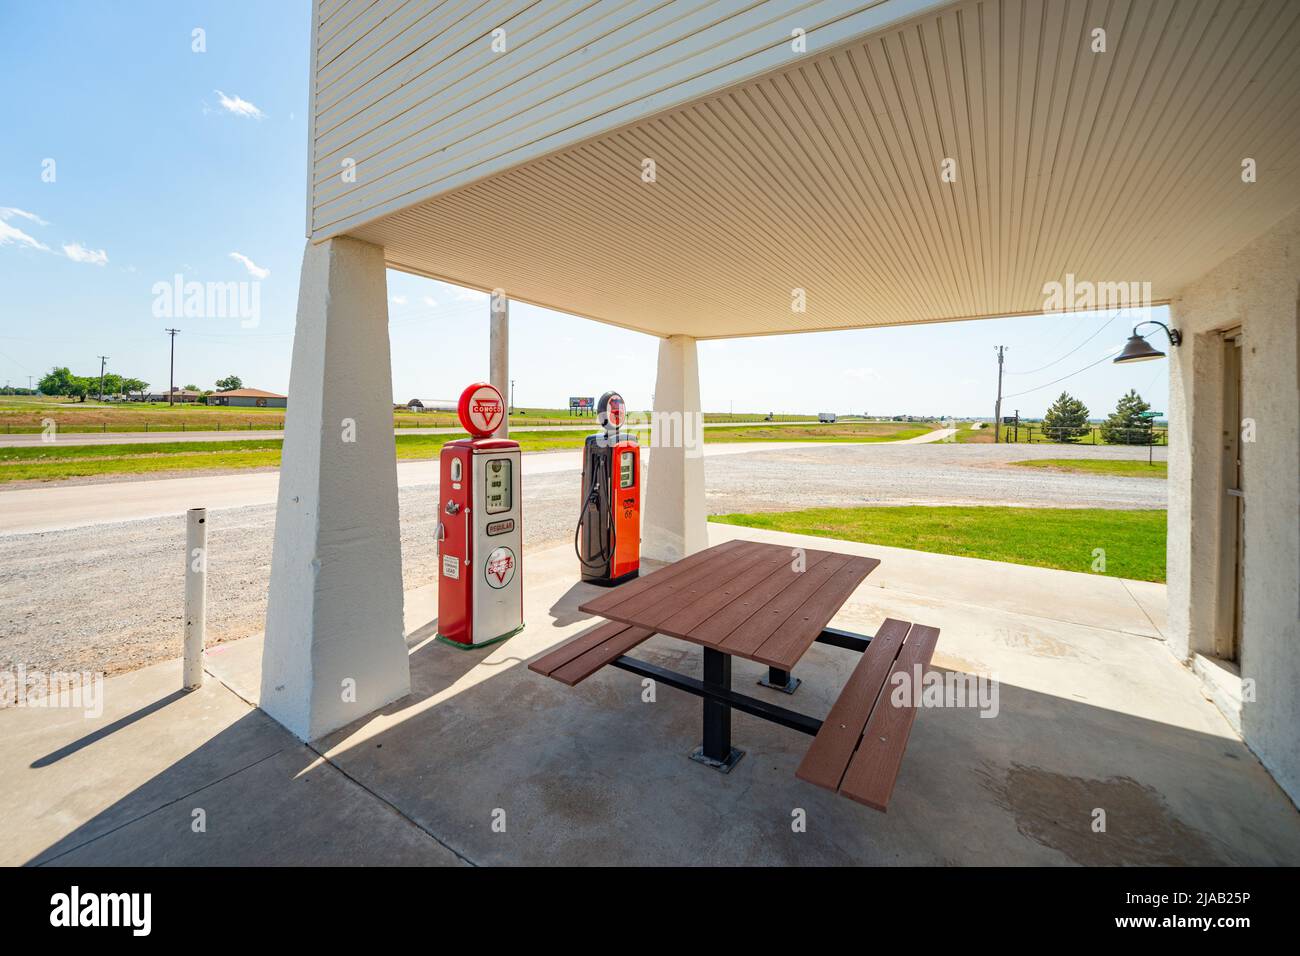 Lucille's historic highway gas station, also known as Provine service station, a restored service station on Route 66, Hydro, Oklahoma, USA Stock Photo